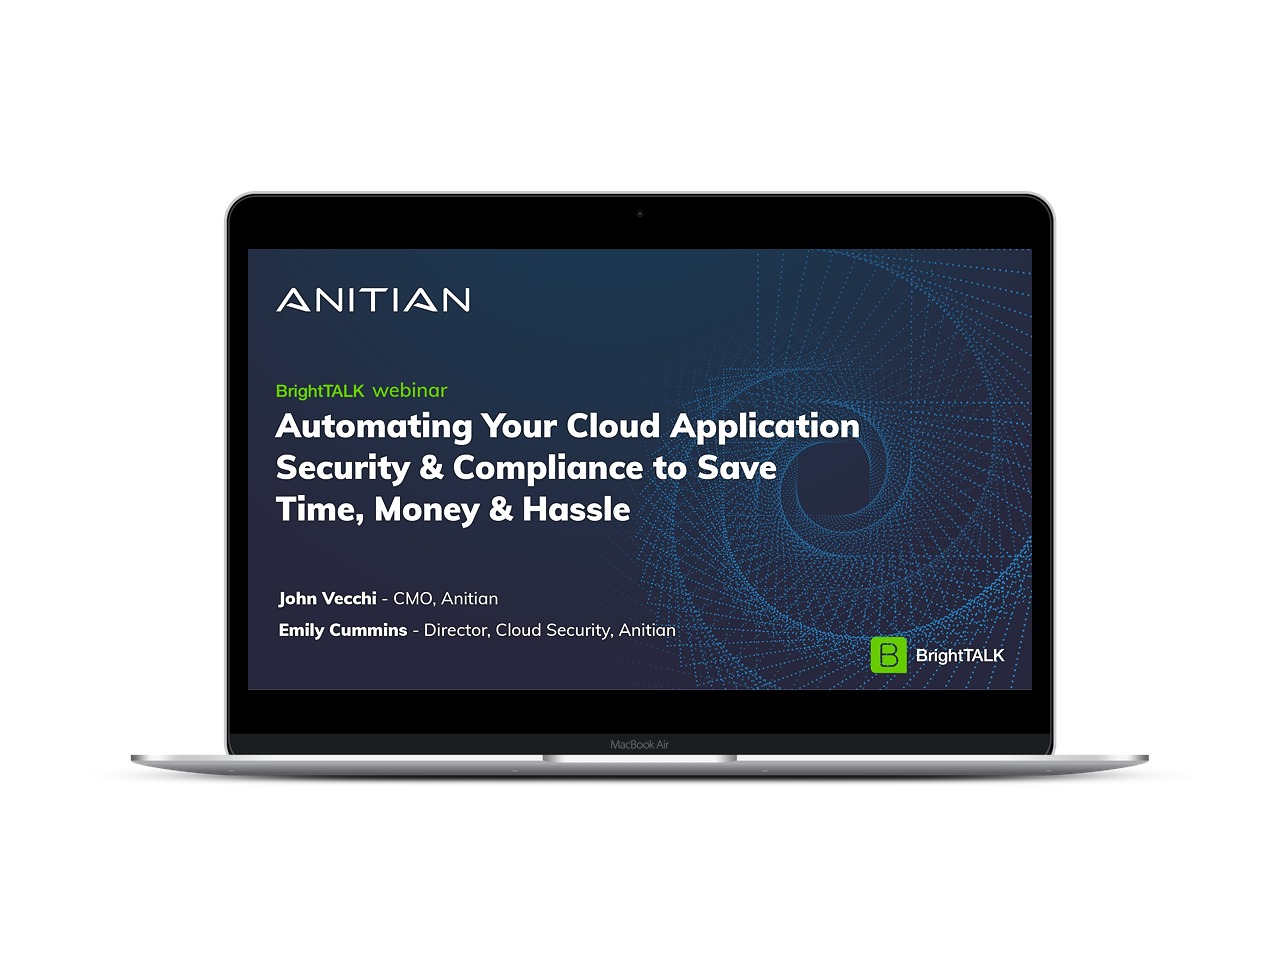 On-Demand Webinar - Automating Cloud Application Security & Compliance to Save Time, Money & Hassle